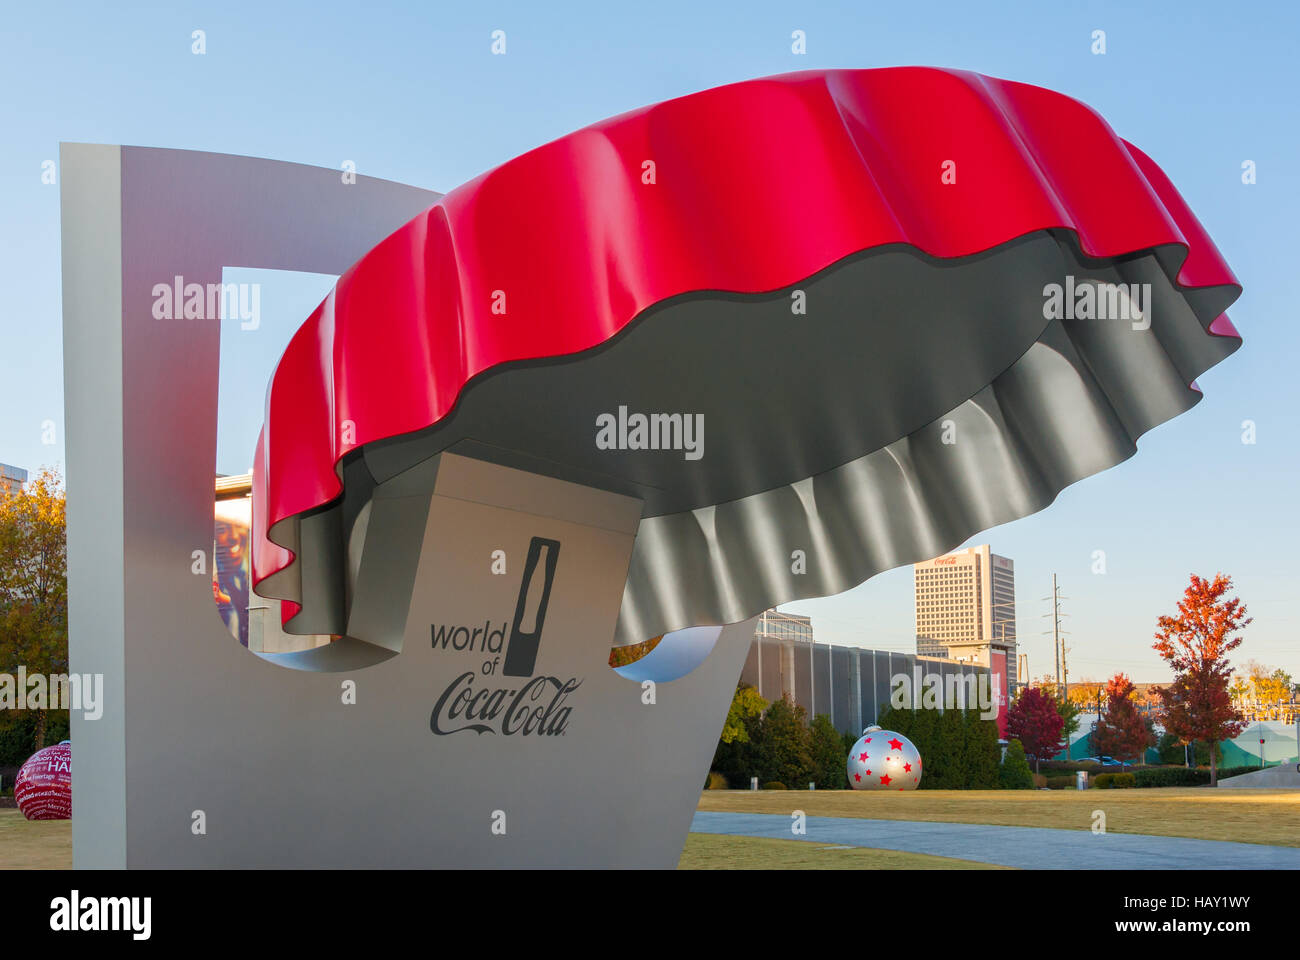 World of Coca-Cola bottle cap information booth in downtown Atlanta with Coca-Cola world headquarters building in background. Stock Photo